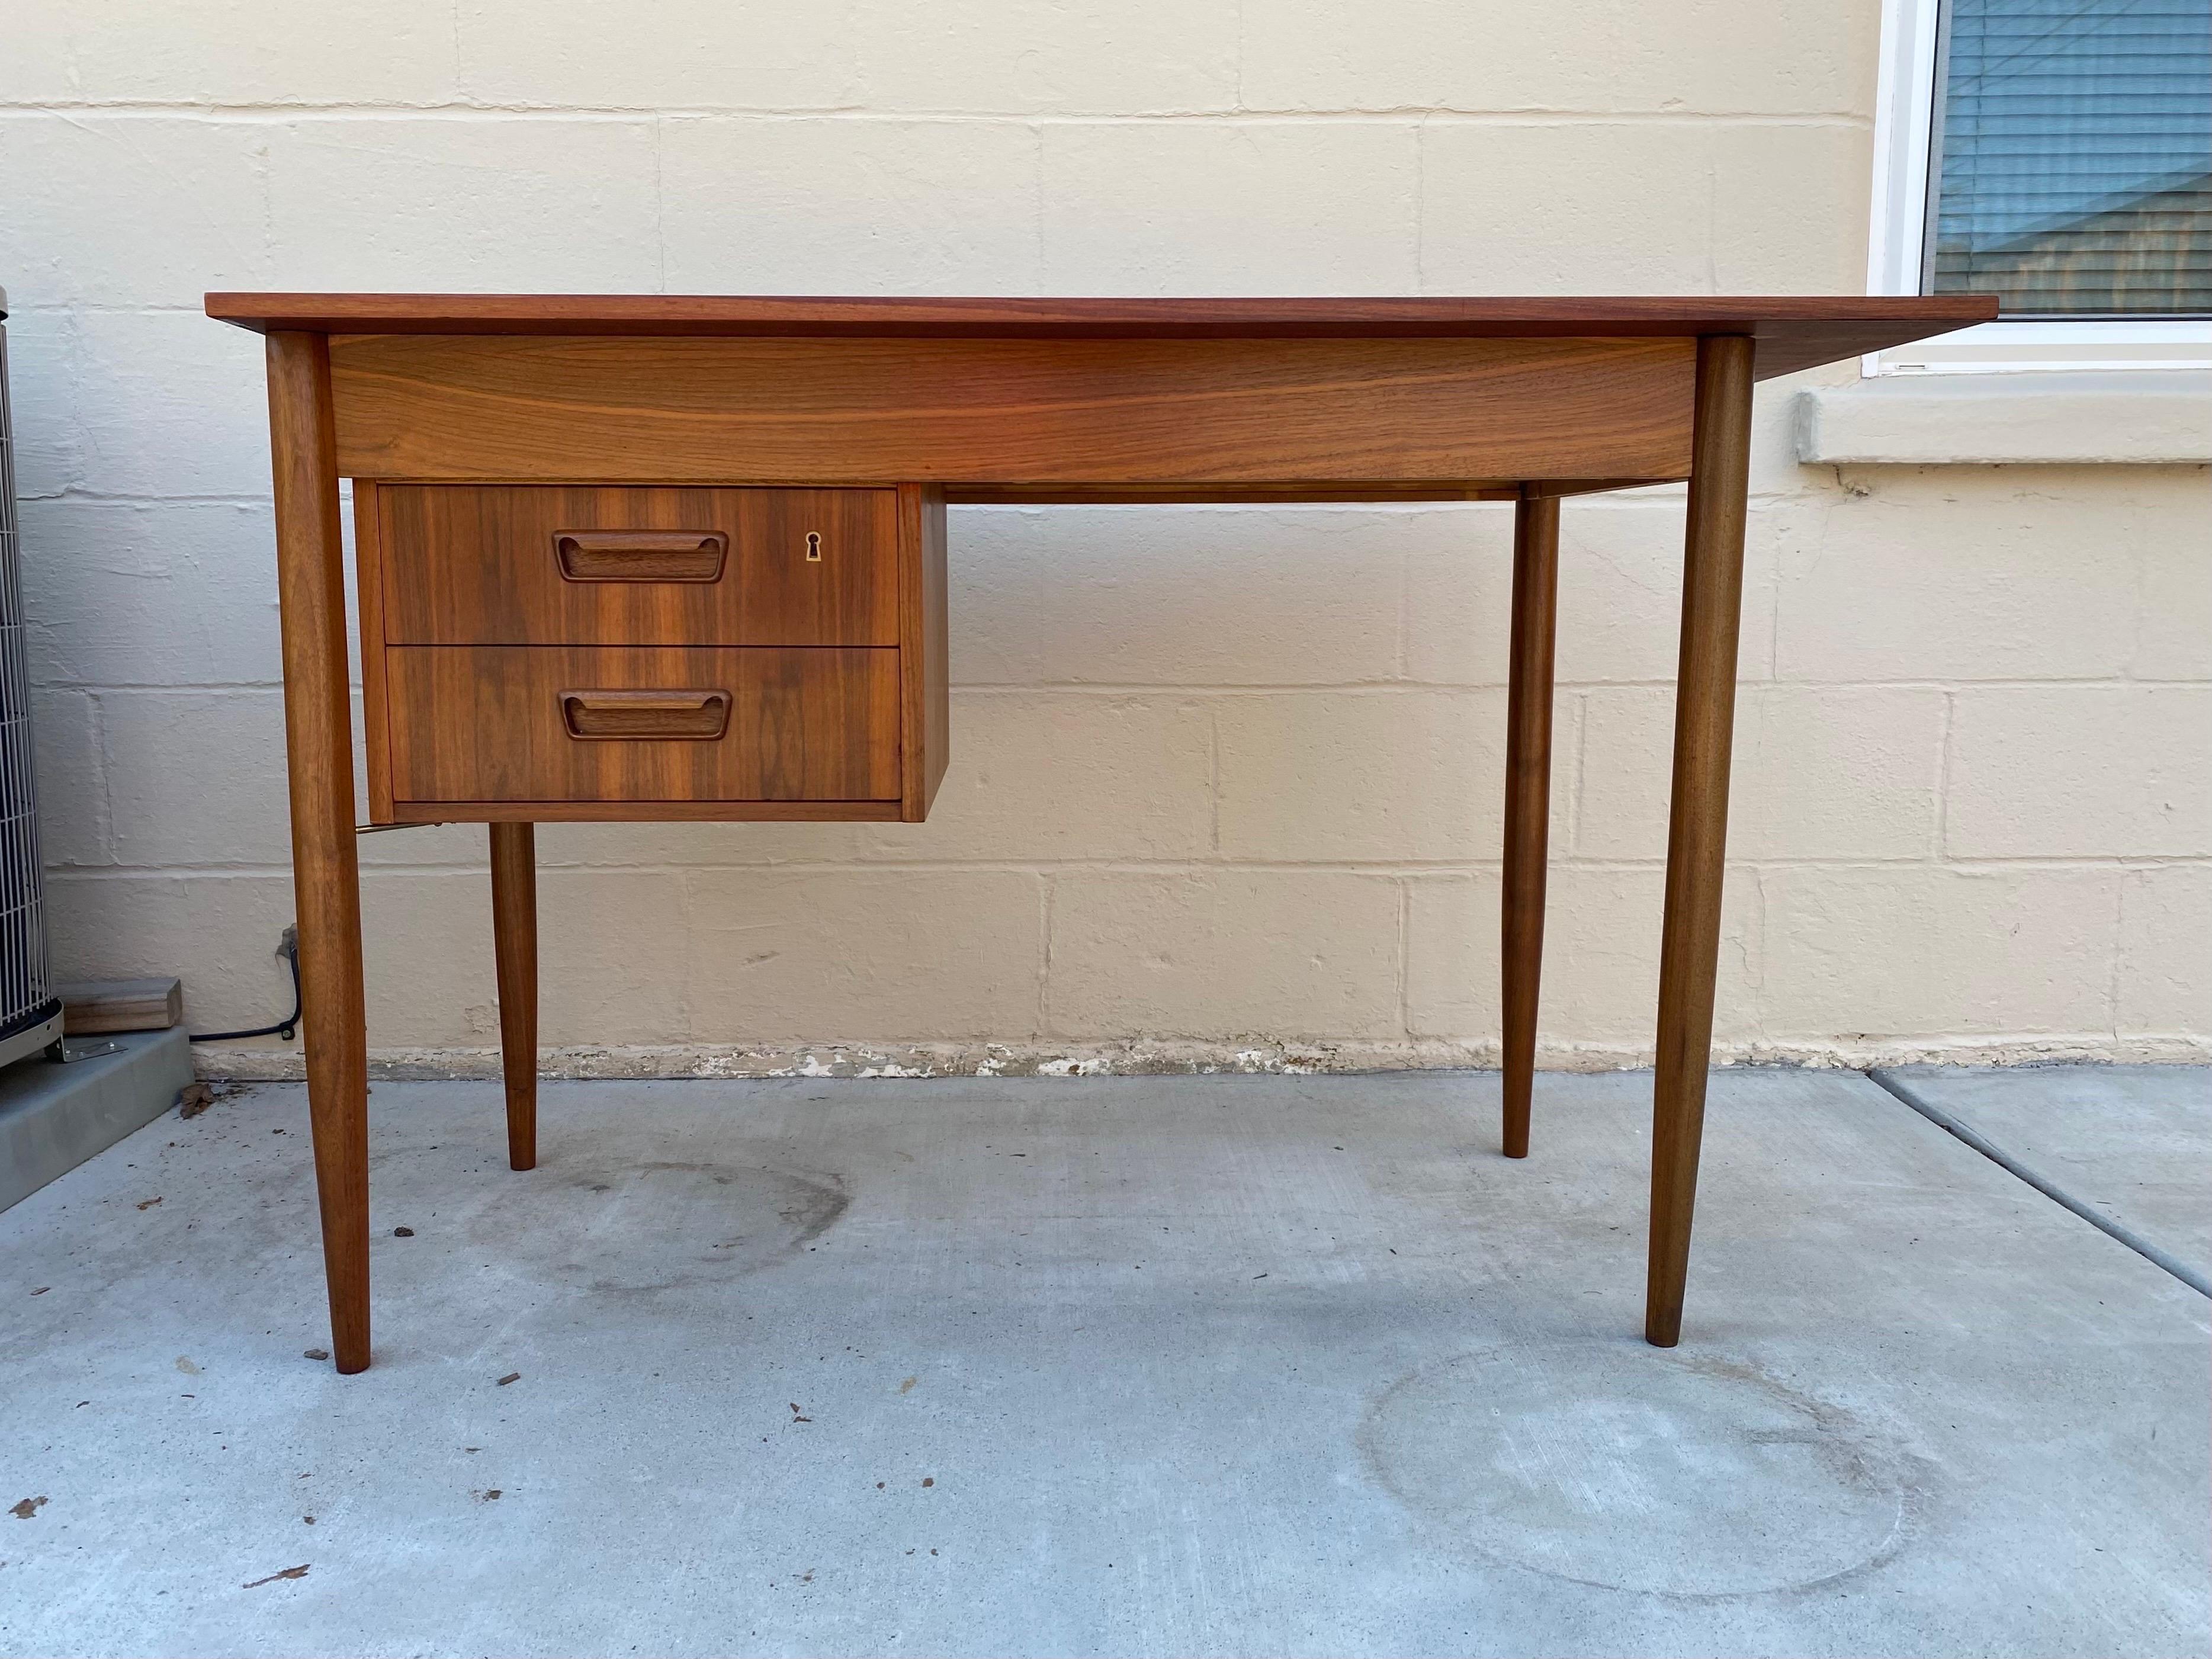 Beautiful and sleek Mid-Century Modern or Danish Modern desk in teak. This desk was designed by Gunnar Nielsen Tibergaard and Made in Denmark in the 1960s.

This vintage writing desk comes in a very useful Size that wont take up much space, but will